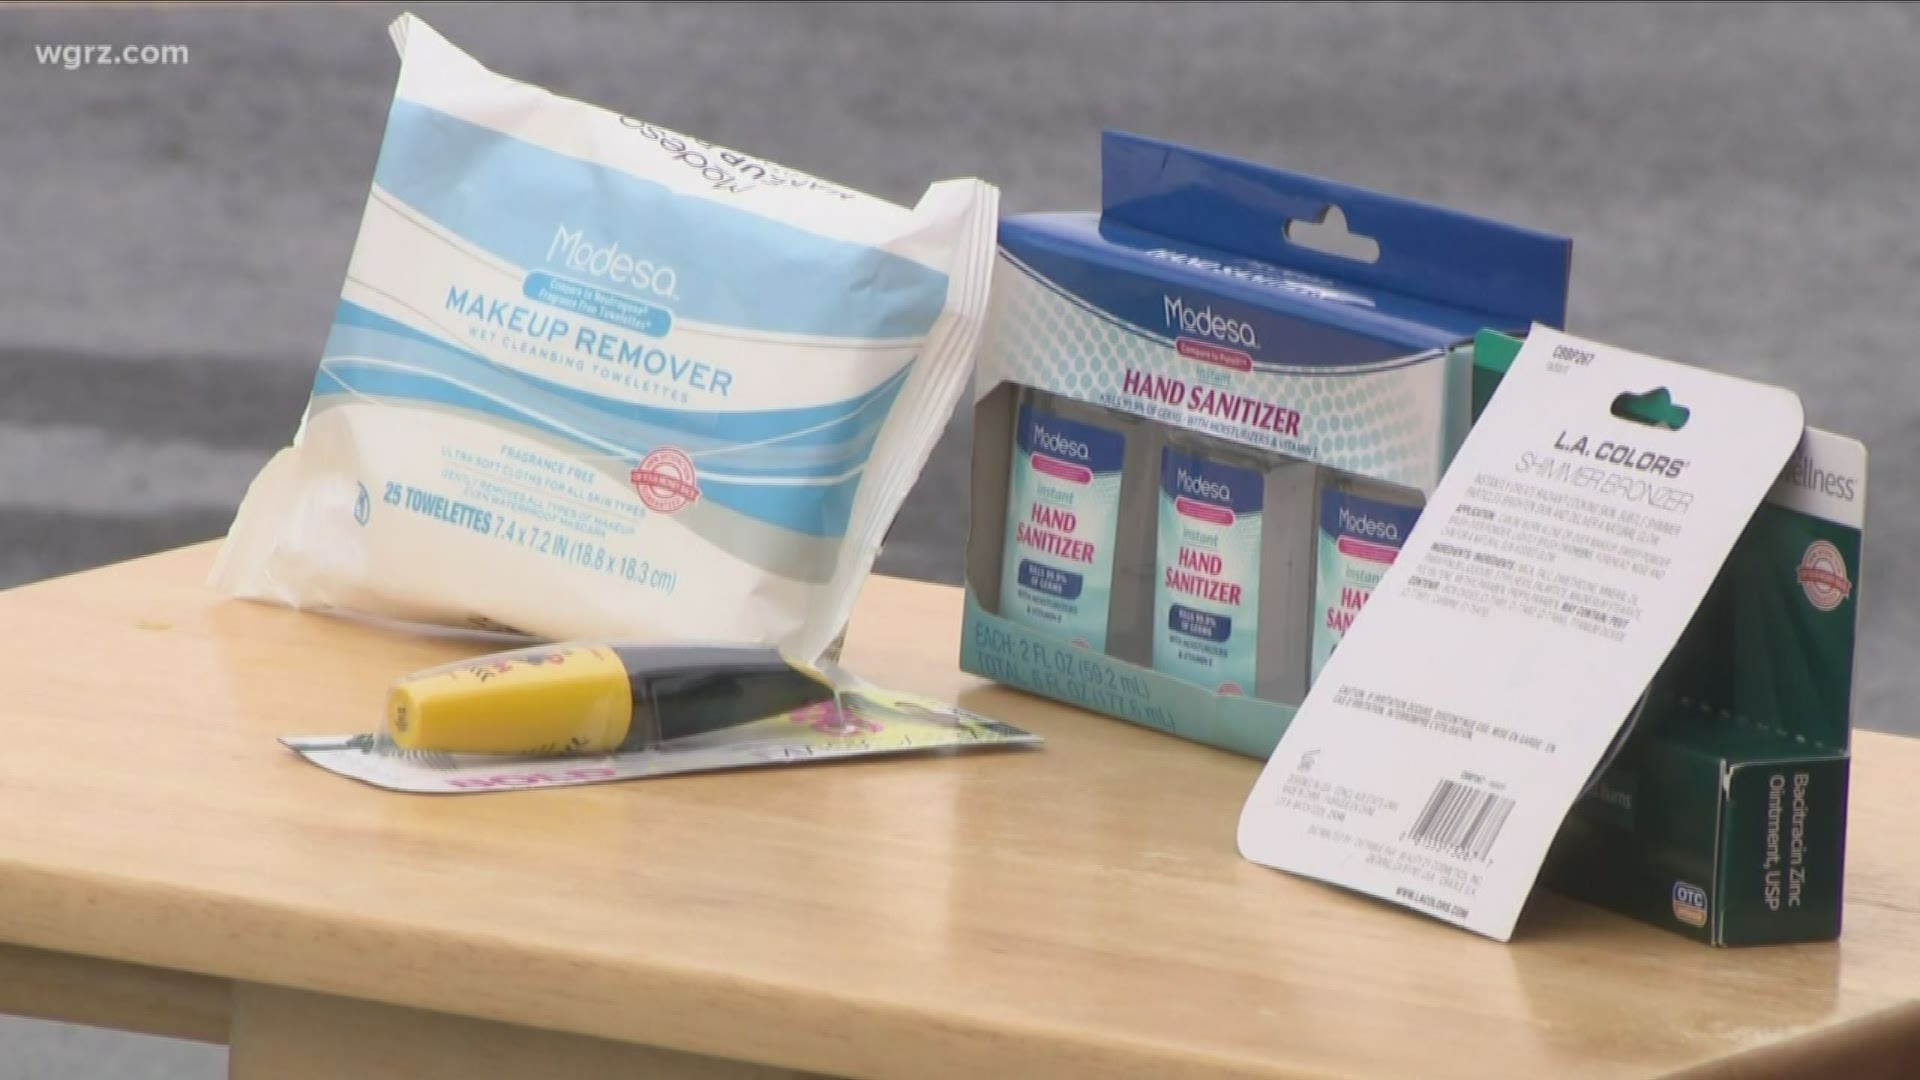 dangerous and contaminated drugs, hand sanitizers and cosmetics popping up in Western New York dollar stores.